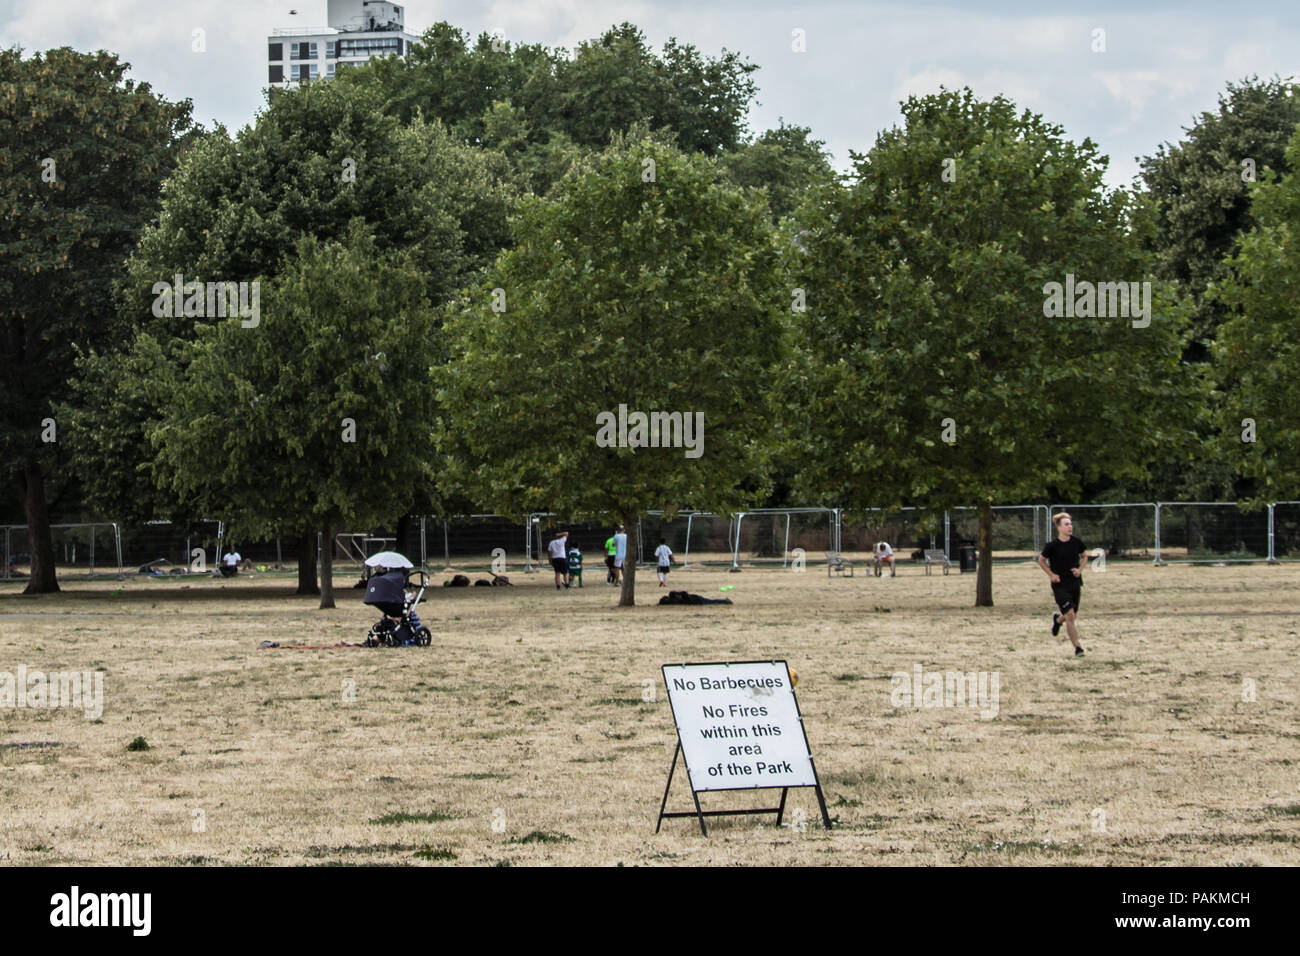 London,UK. 24 July, 2018. 'No Barbecues, no fires within this area of the park'.  London gets some respite with some cloud but still no rain in parched South London where the grass in Burgess park looks more like sand. David Rowe/Alamy Live News. Stock Photo